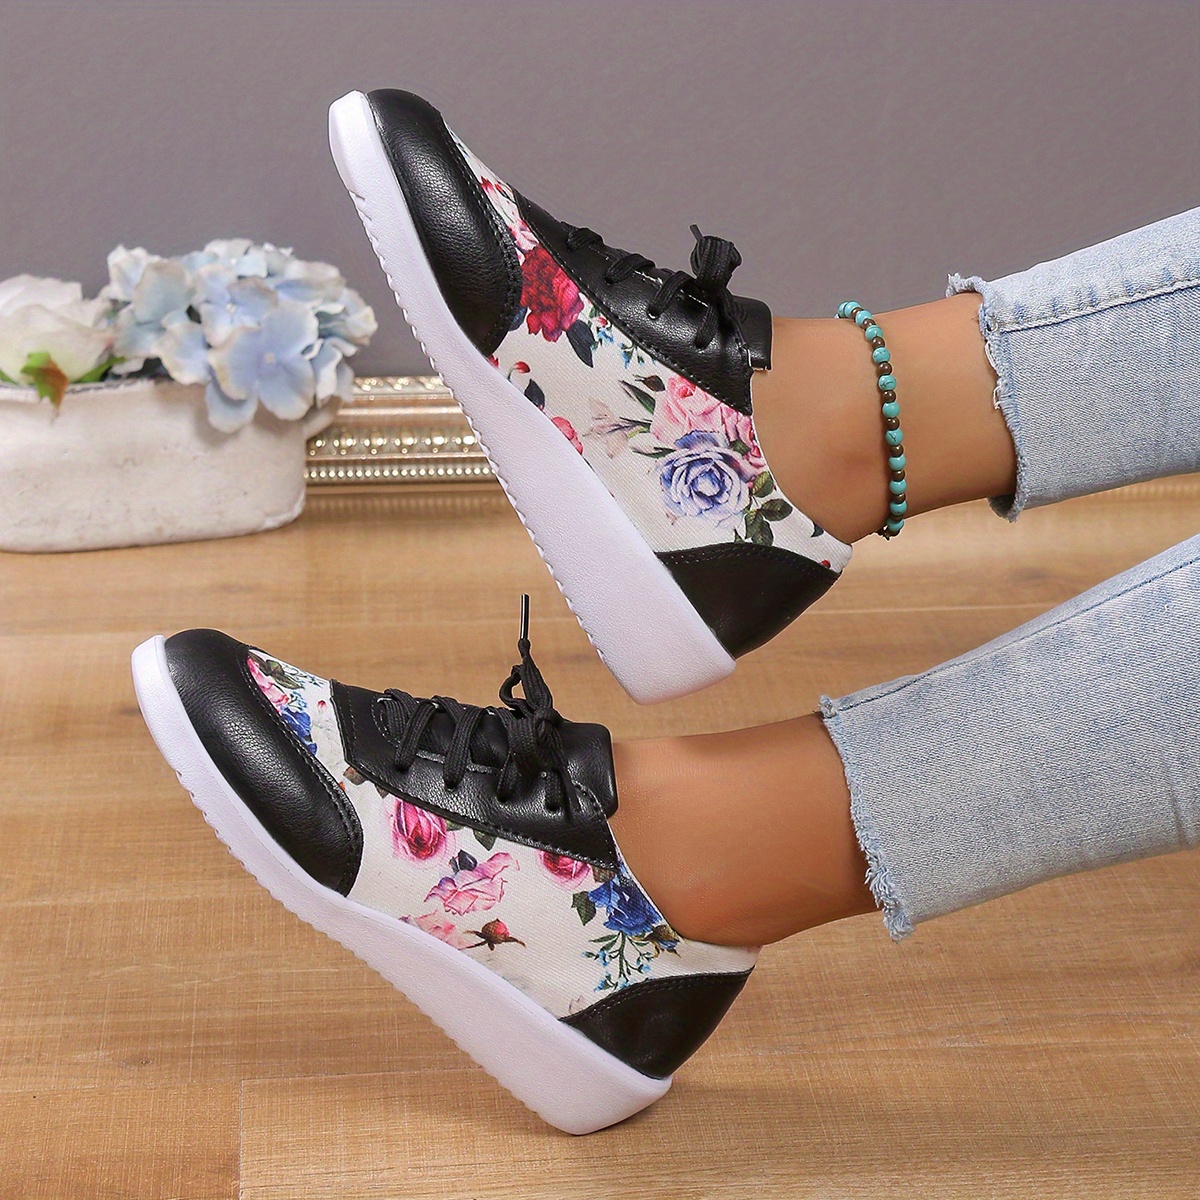 womens floral print sneakers lace up low top round toe non slip outdoor lightweight trainers casual versatile shoes details 10